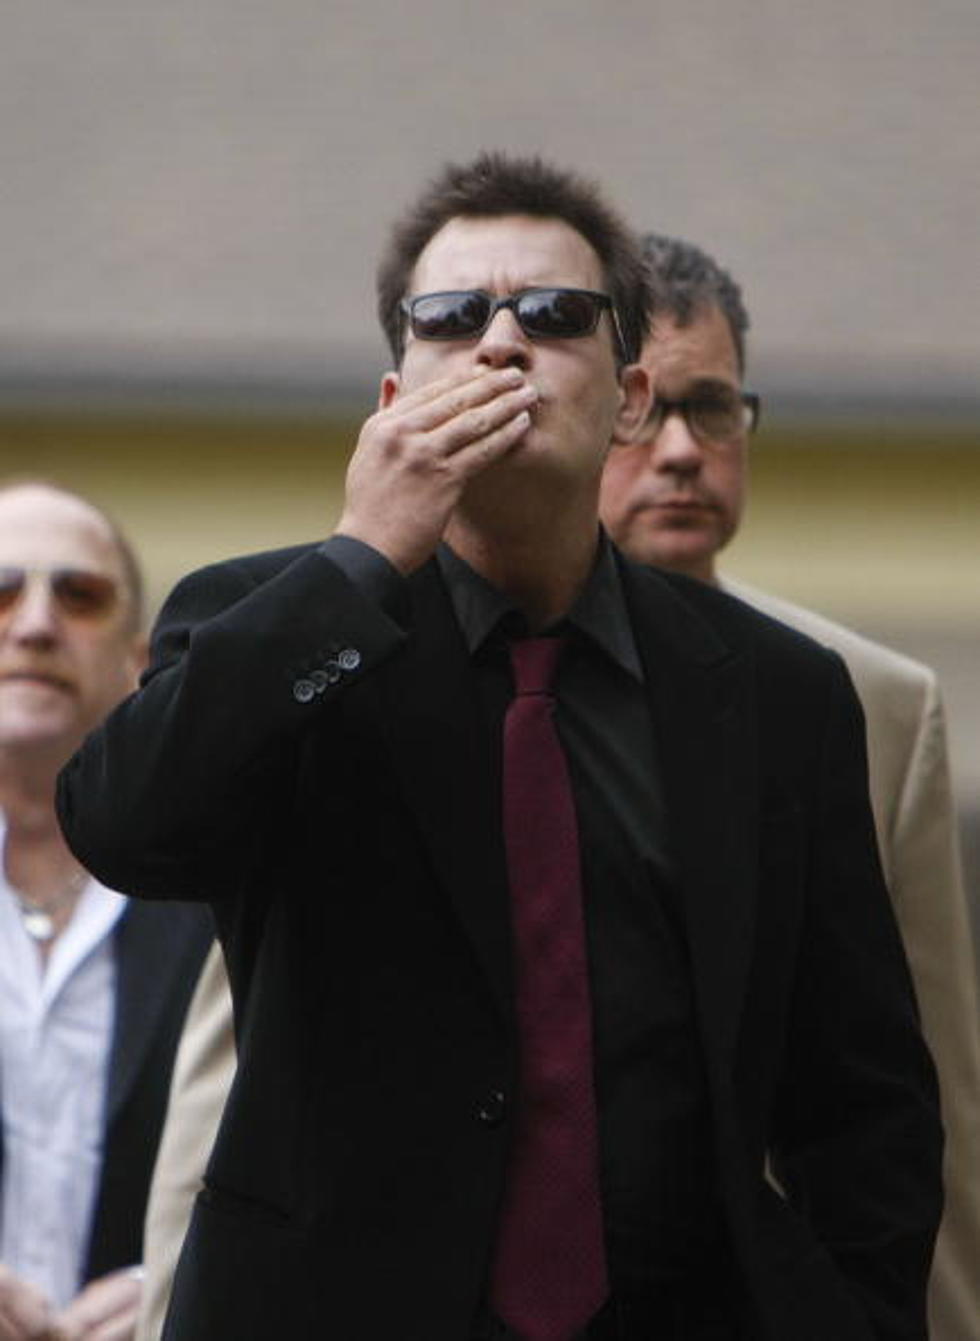 CBS Wants Charlie Sheen Back on ‘Two and a Half Men’